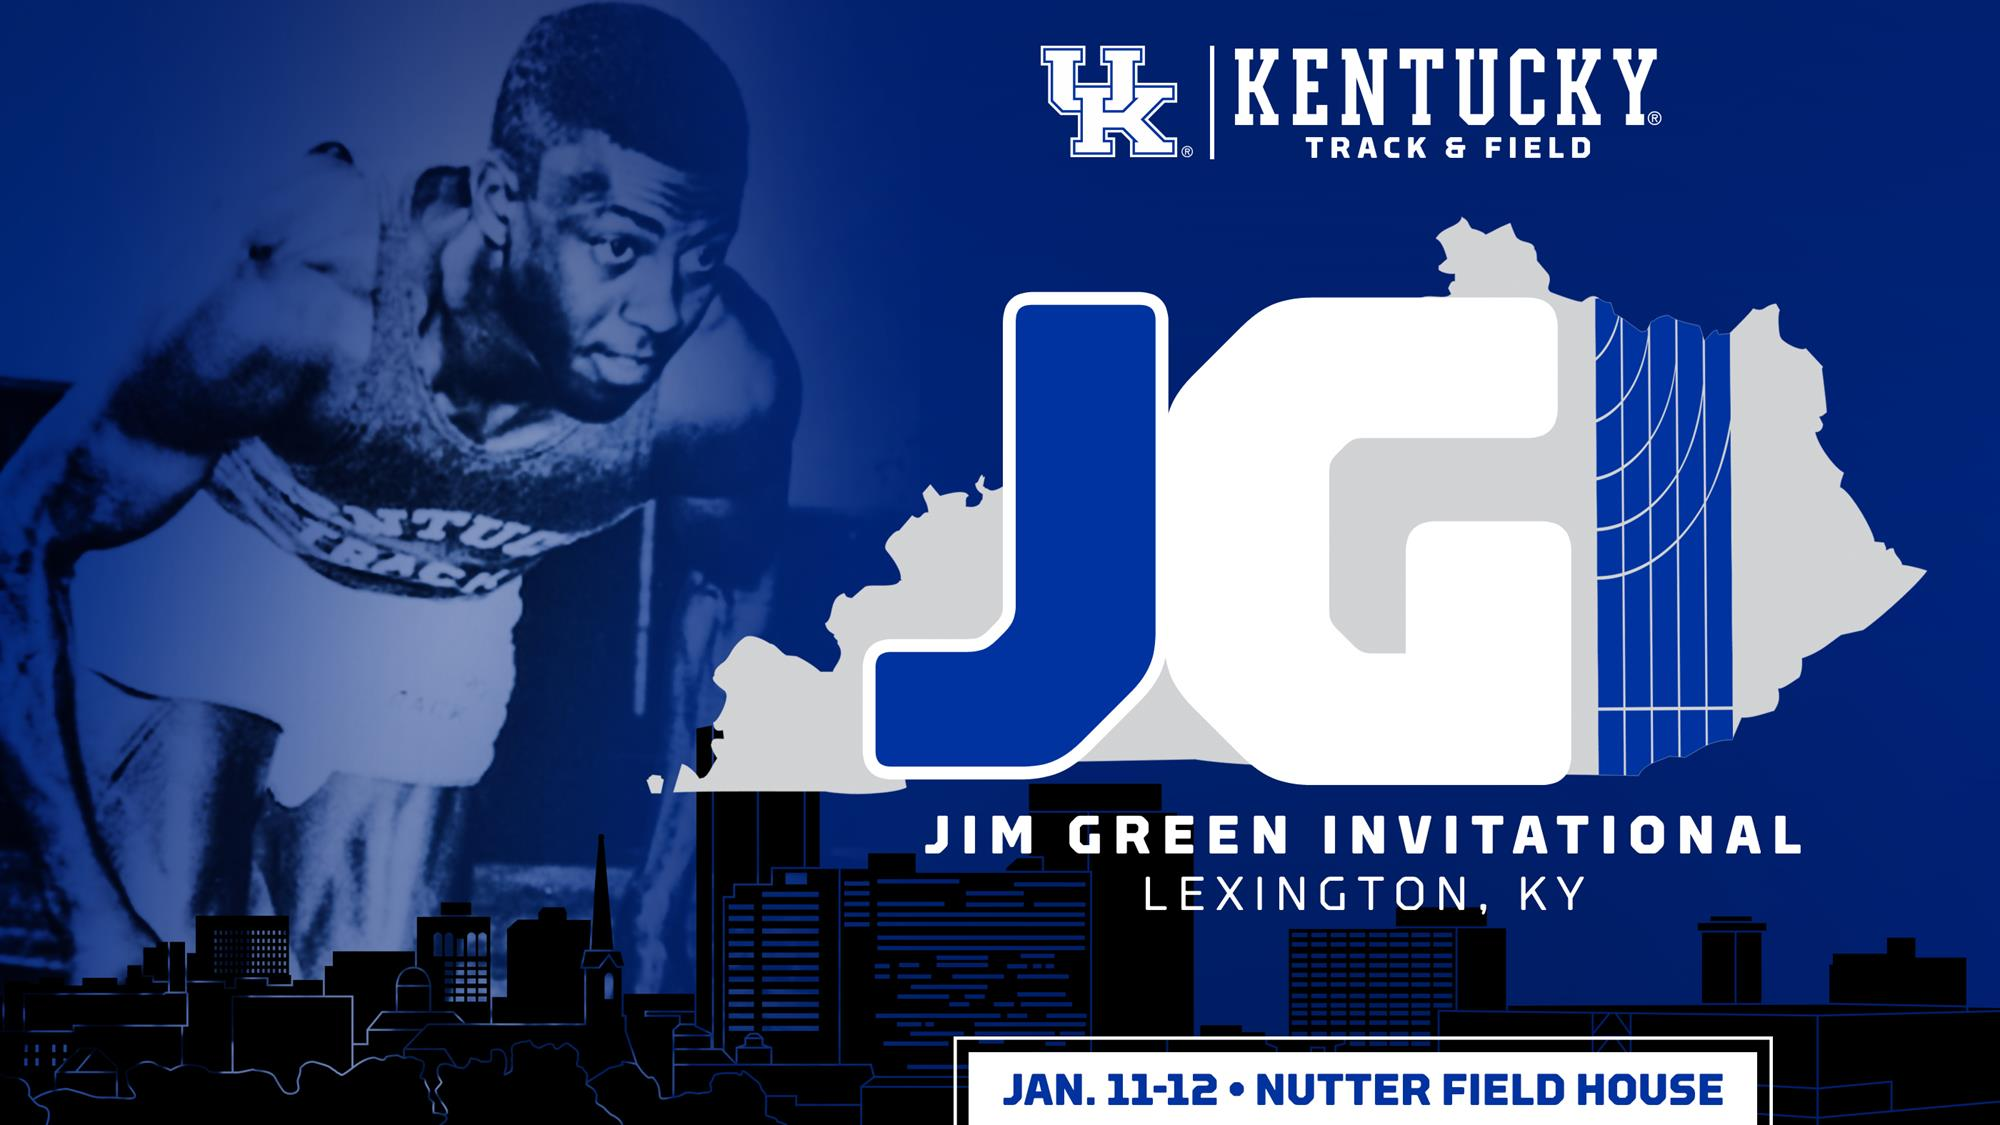 Jim Green Invitational to Open 2019 UK Home Track and Field Season